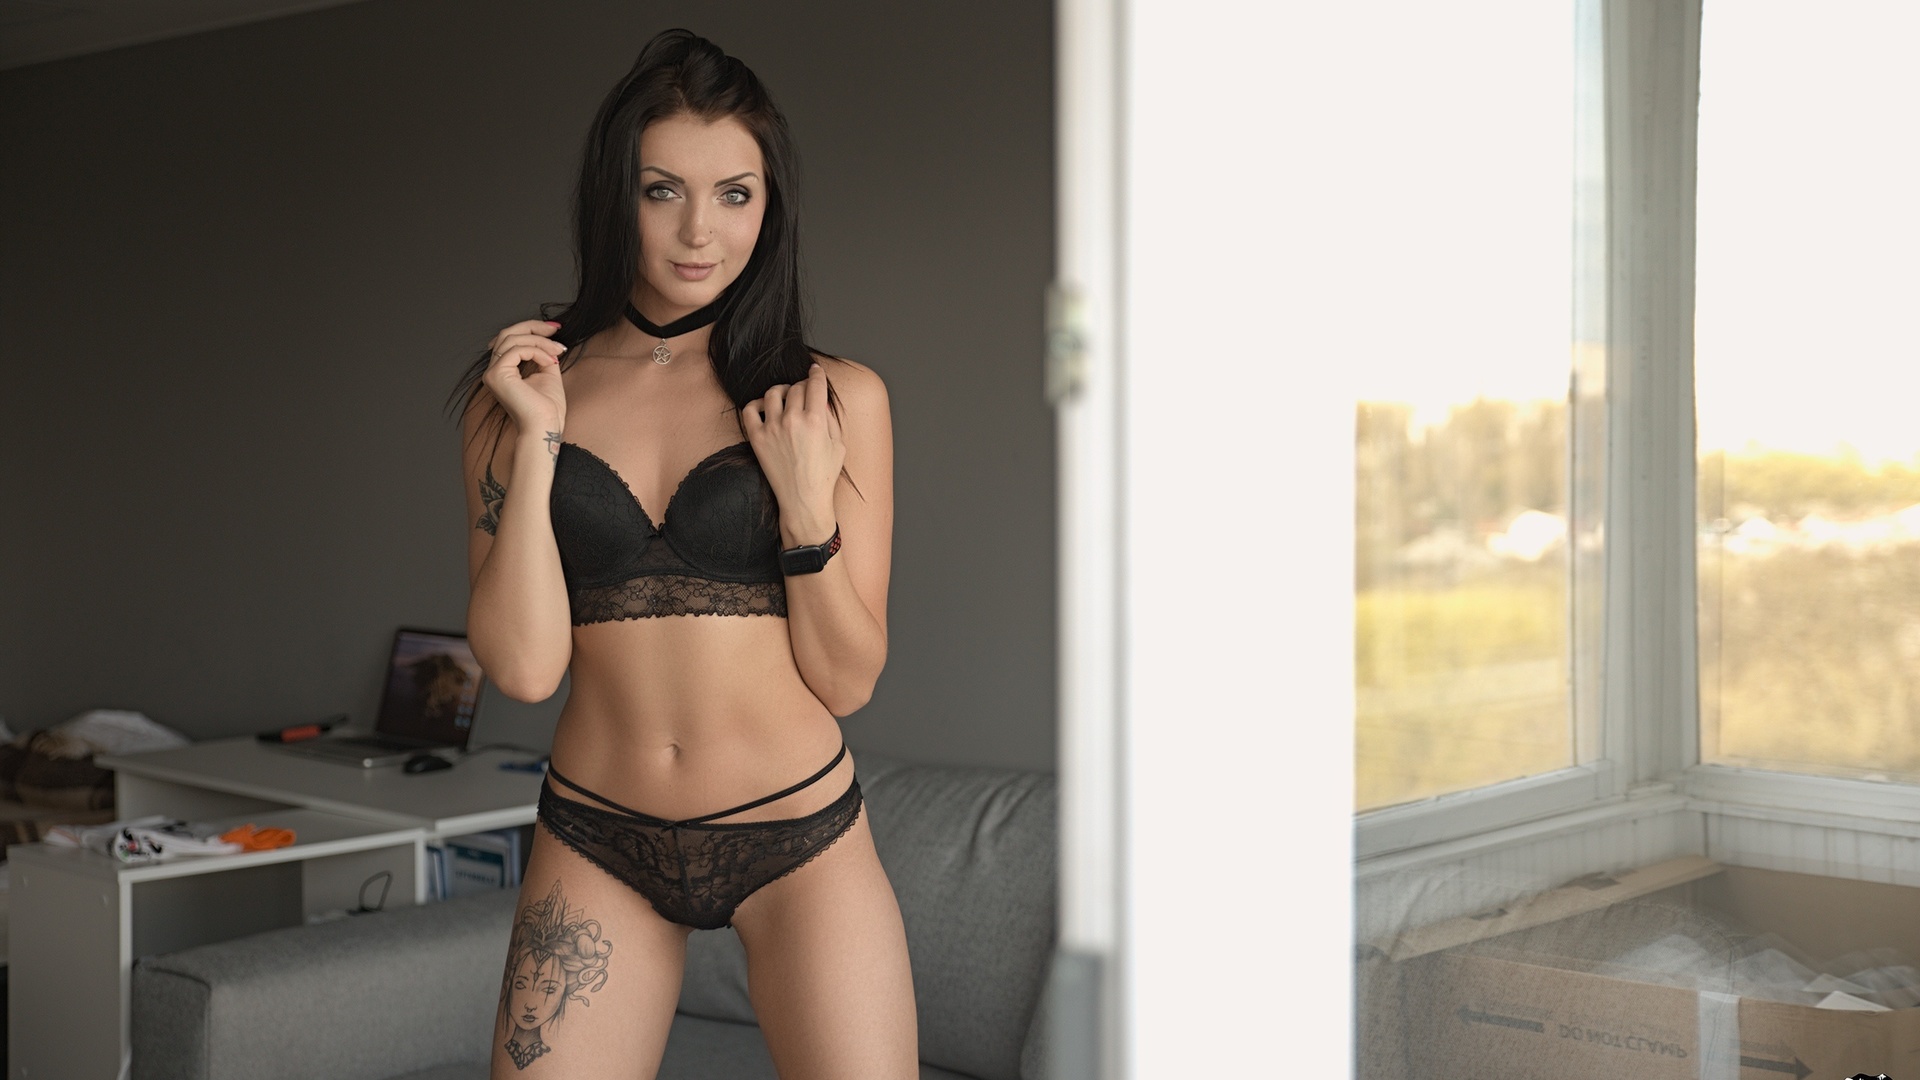 women, brunette, black lingerie, couch, tattoo, belly, smiling, cleavage, desk, laptop, watch, pierced nose, women indoors